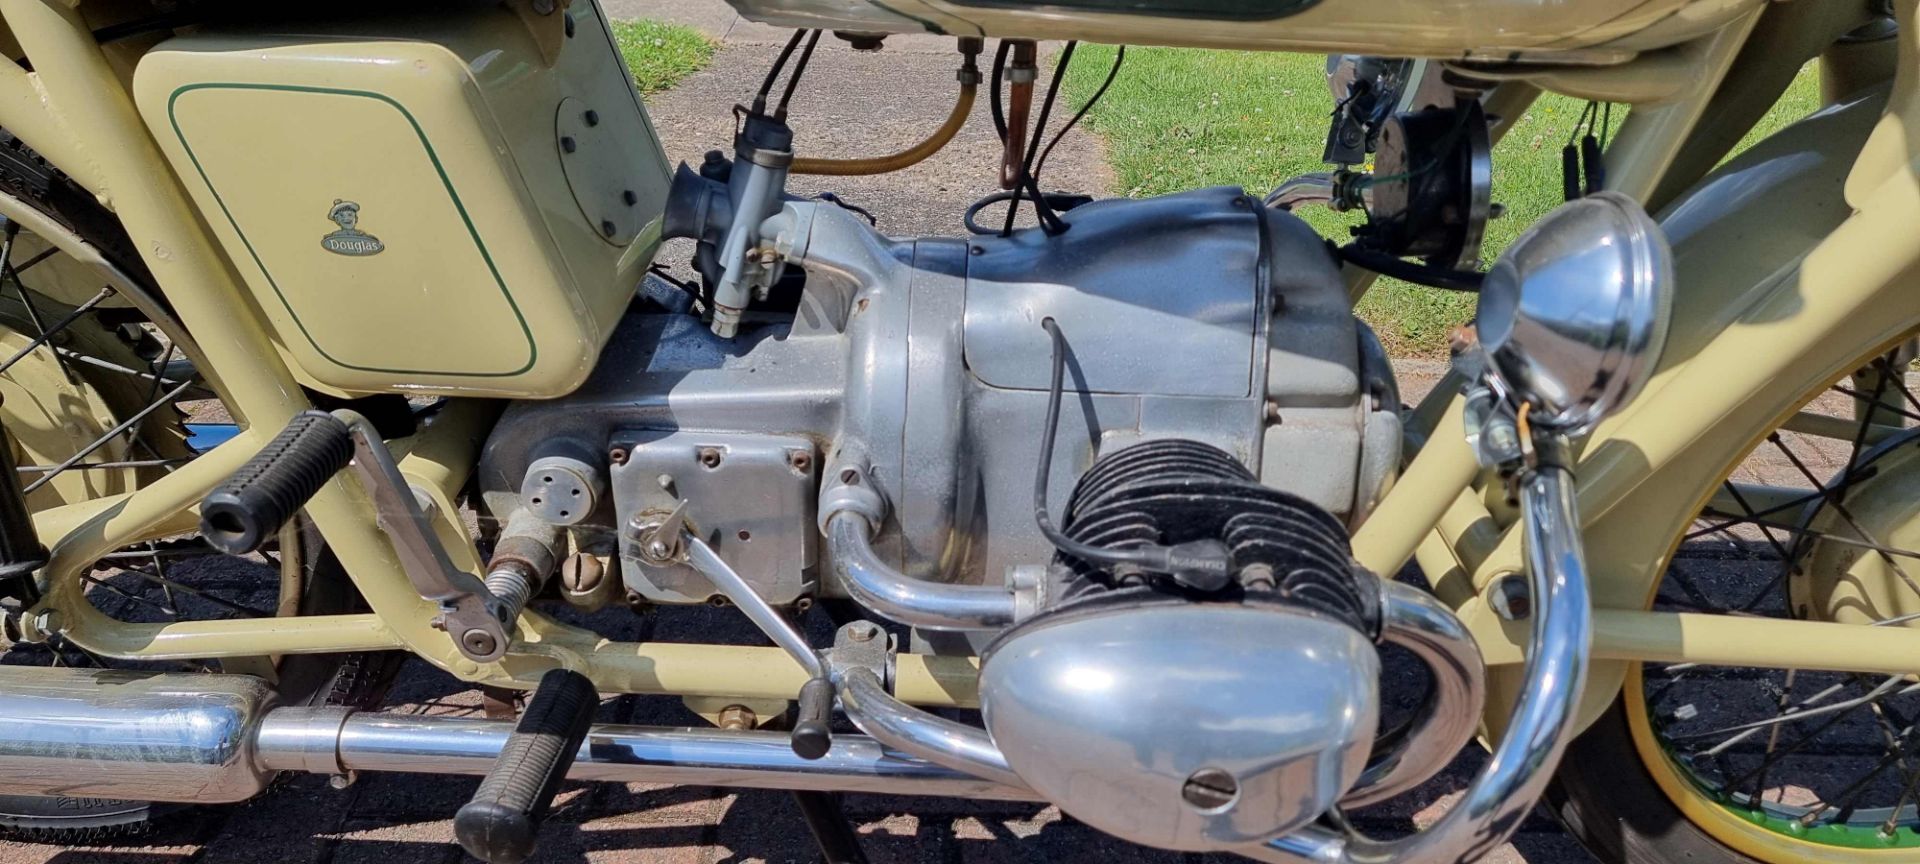 1957 Douglas Dragonfly, 350 cc. Registration number TYR 252 (non transferable). Frame number 1584/6. - Image 5 of 12